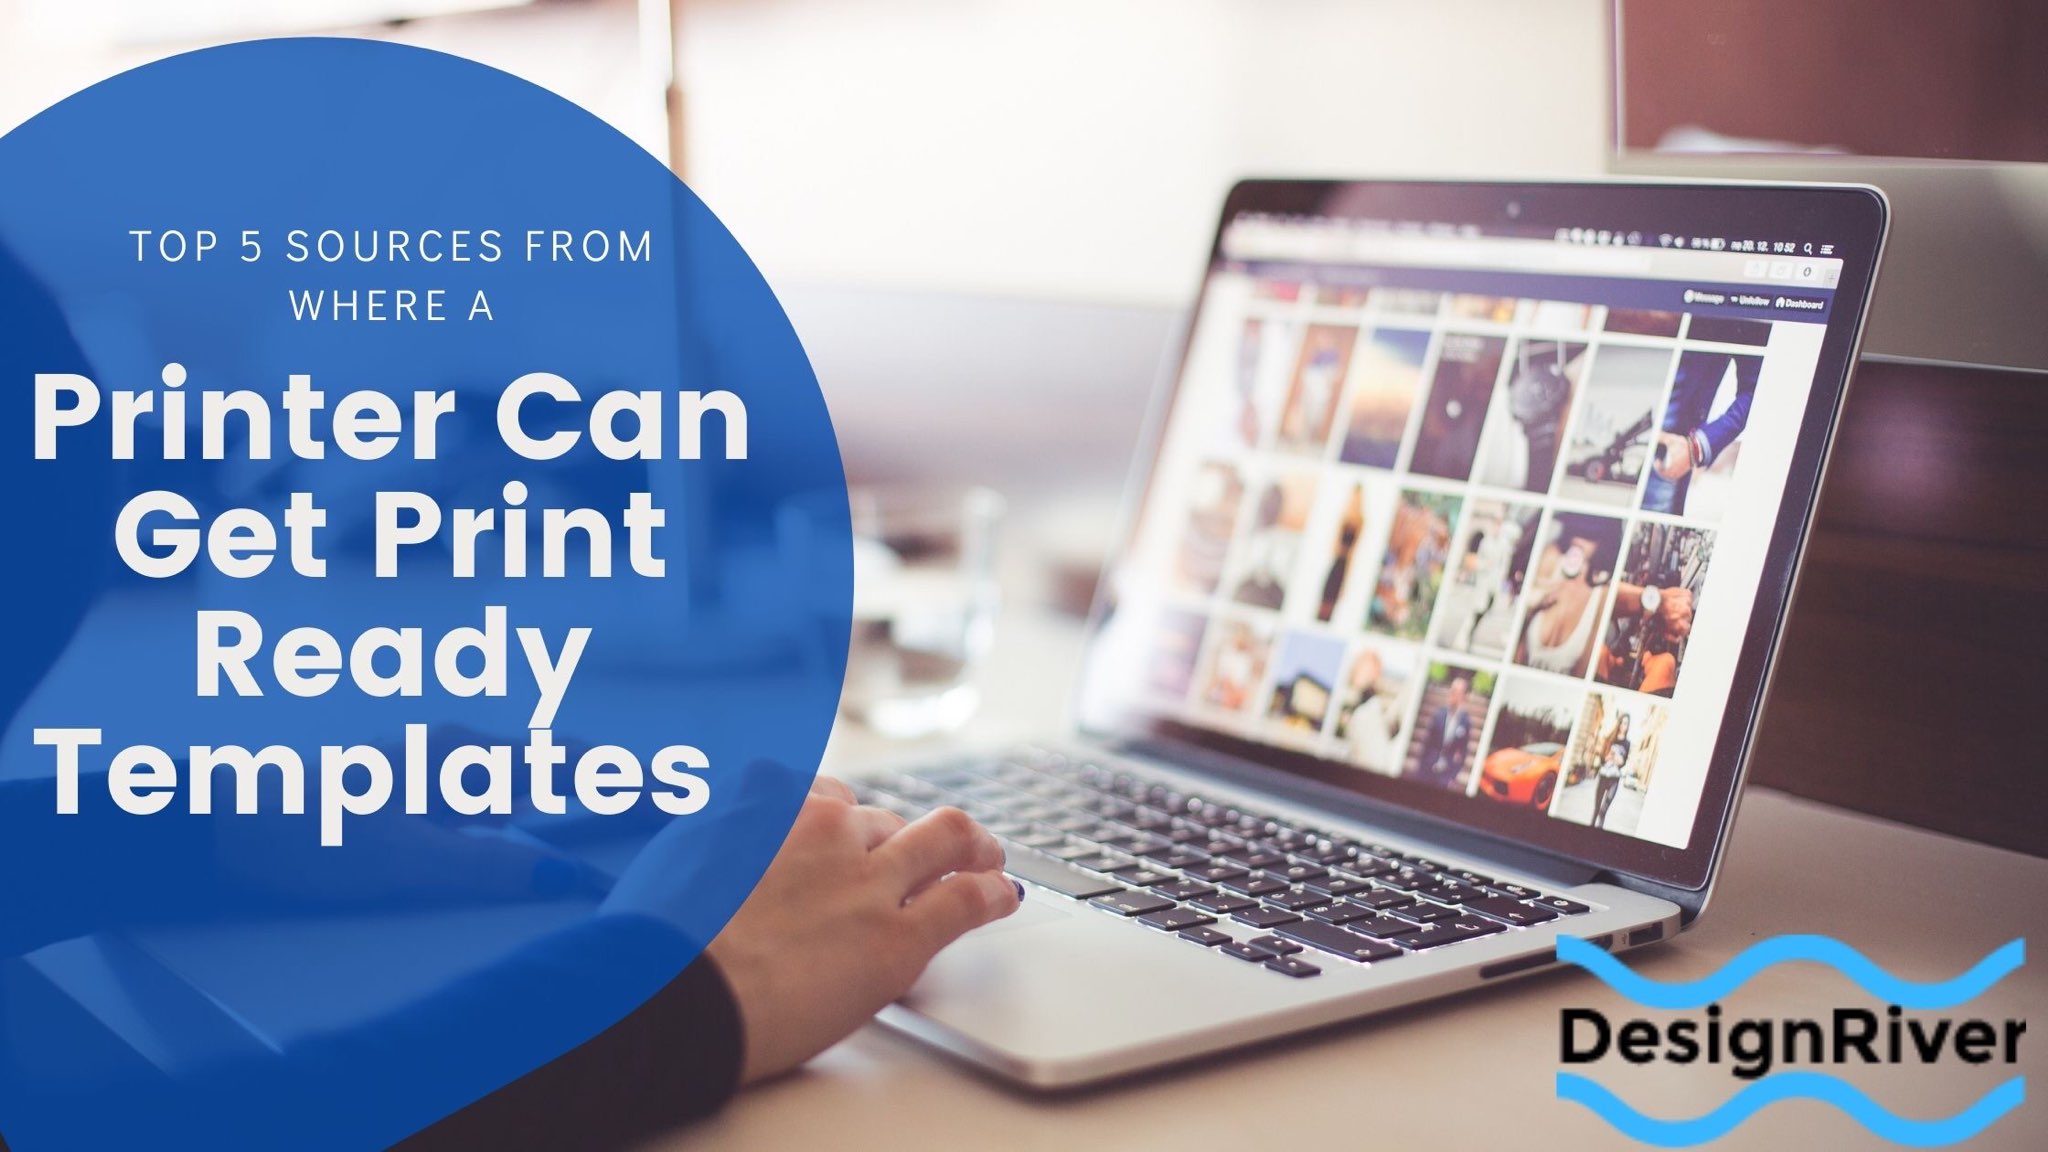 Top 5 Sources From Where A Printer Can Get Print Ready Templates 